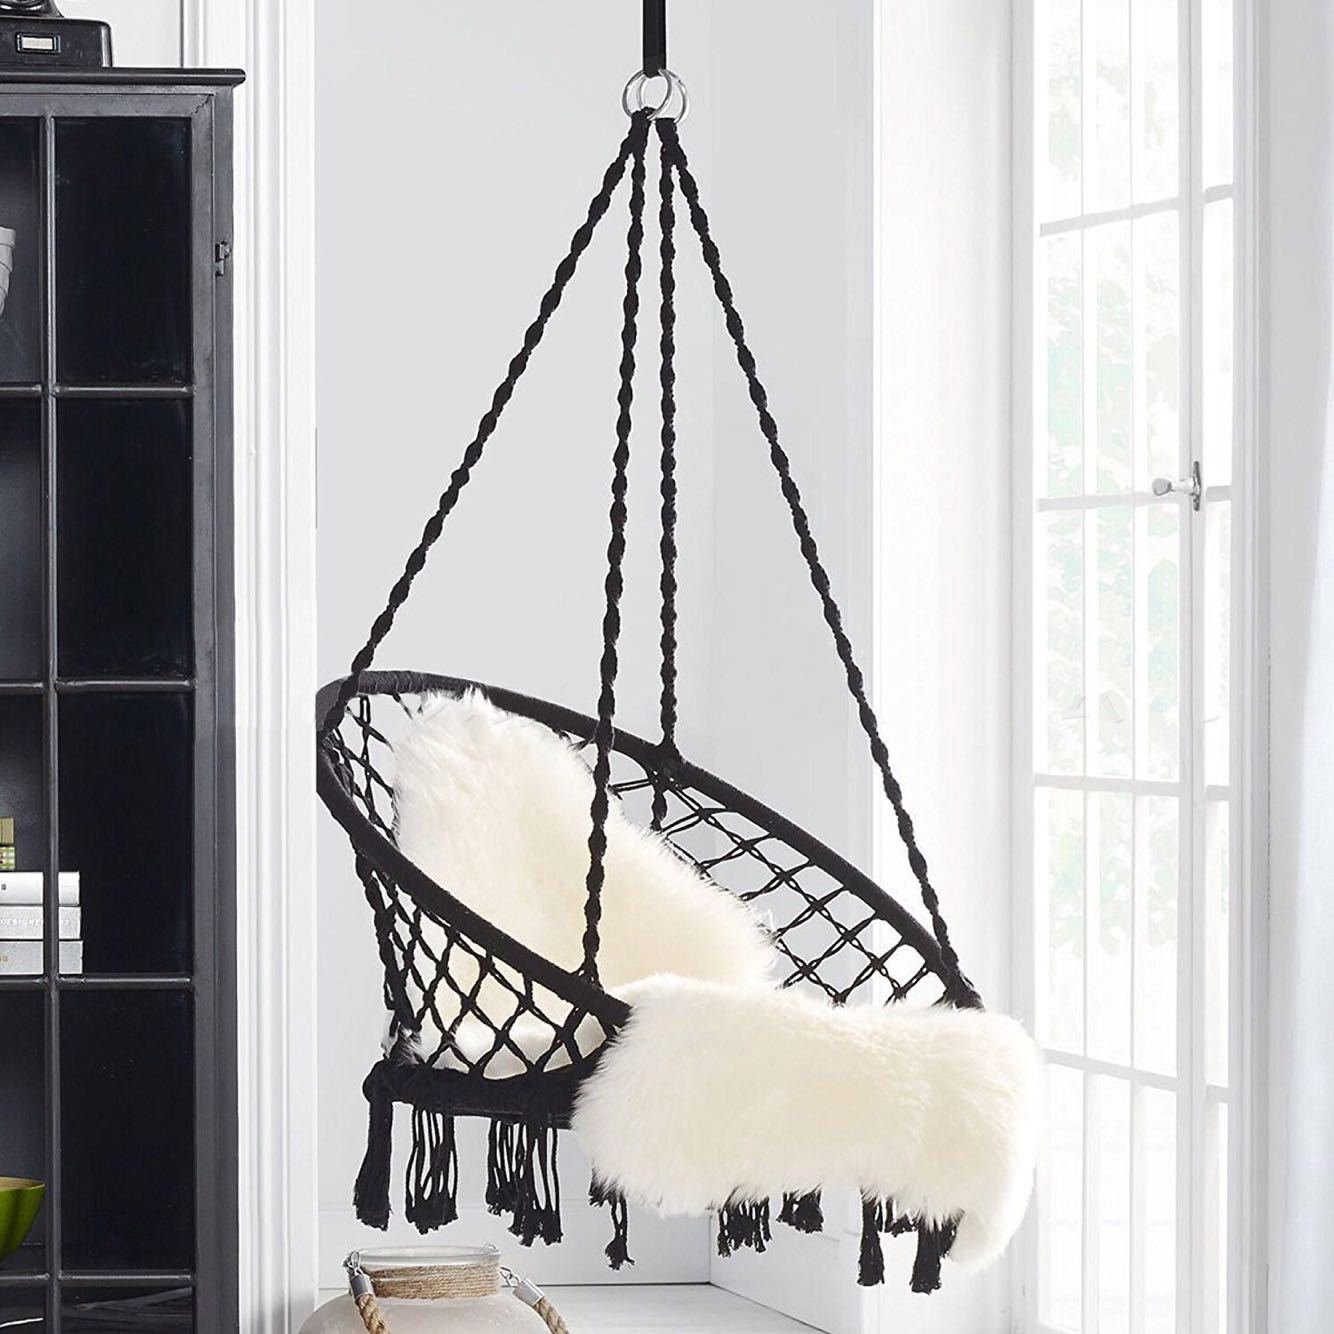 INS Nordic Style Leisure Glider Iron Tube Photography Artistic Rocking Chair Outdoor Indoor Outdoor Hanging Chair Glider